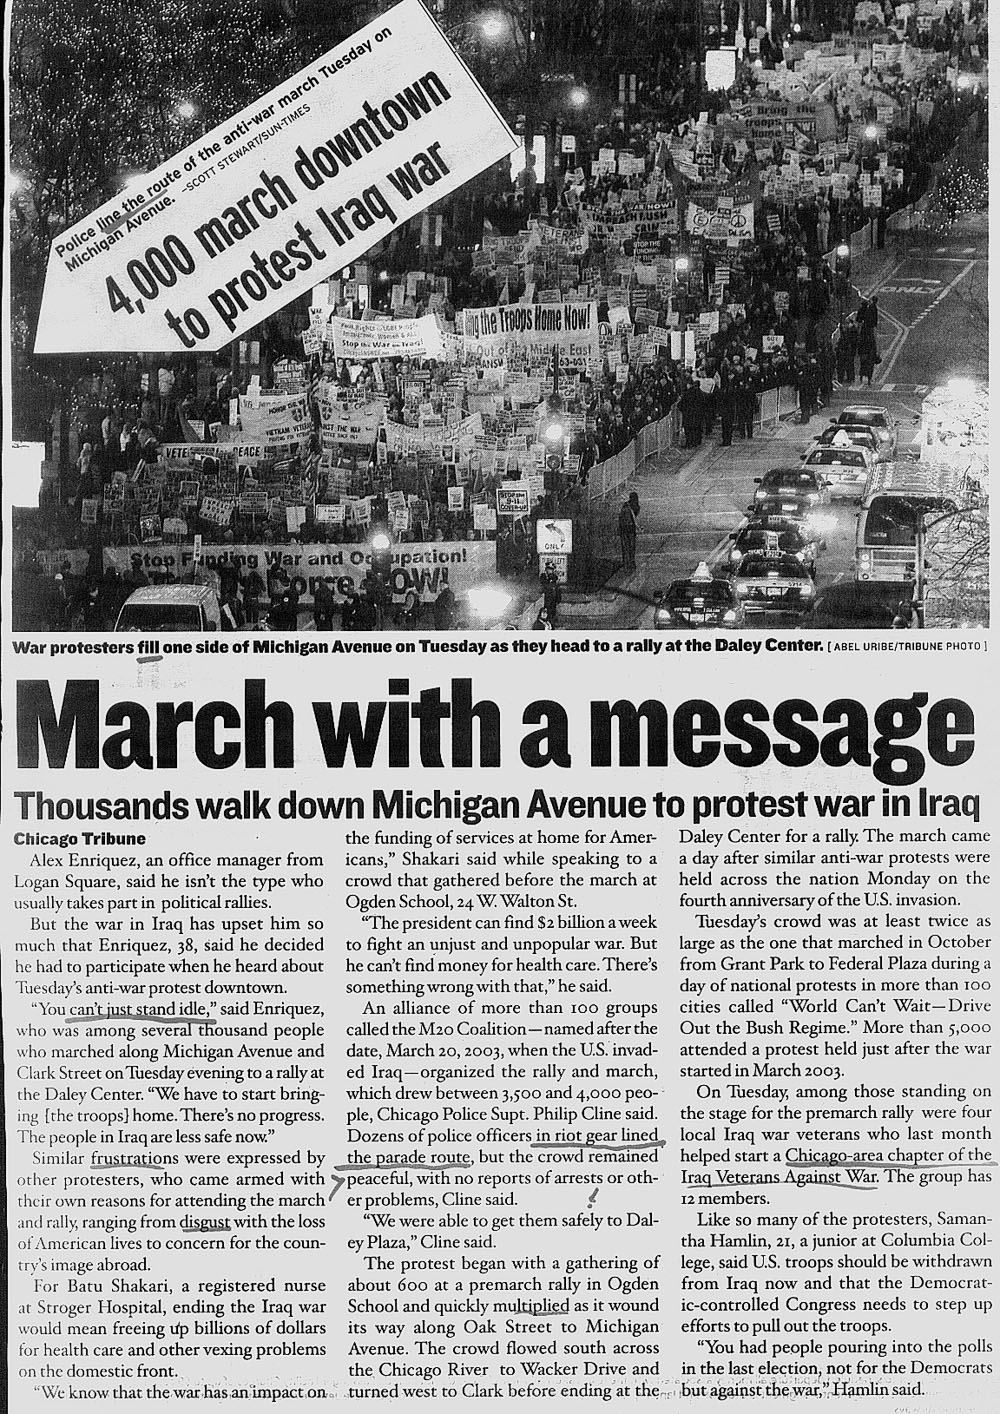 Chicago March 20, 2007 antiwar demonstration account